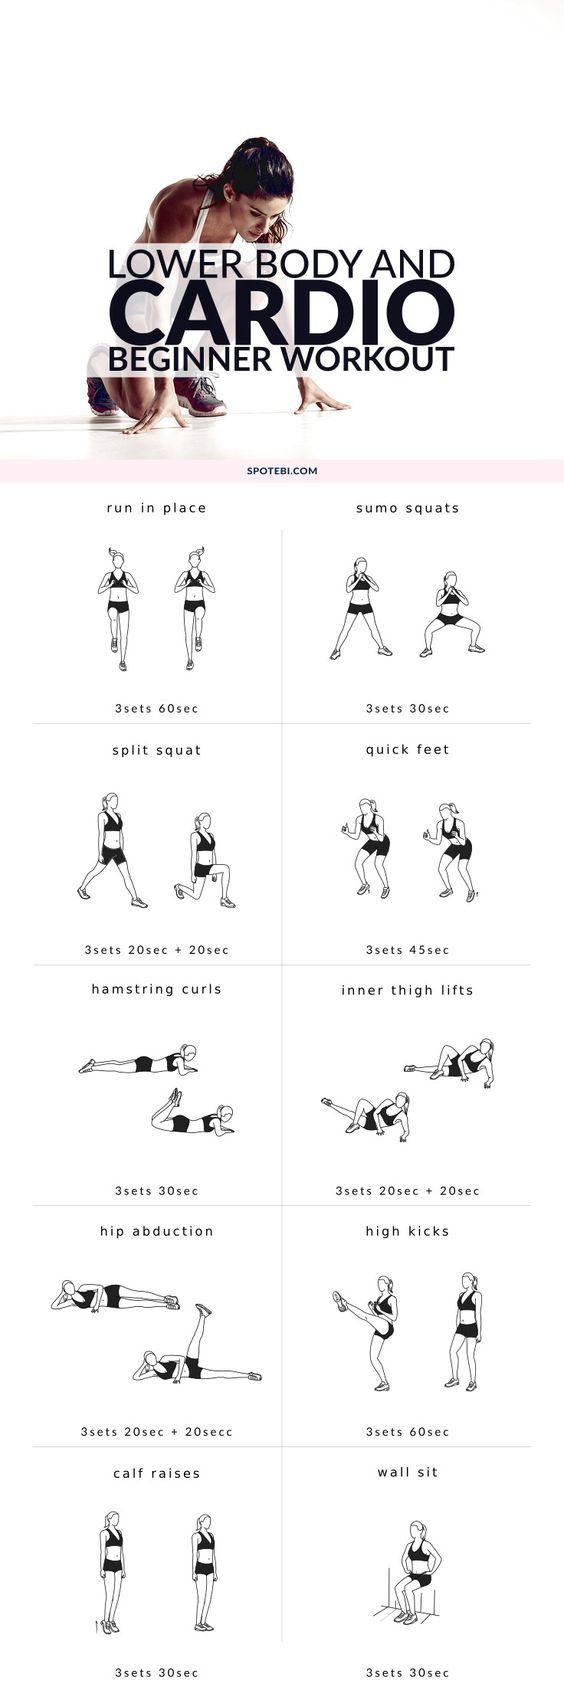 23 Beginner Fat Loss Workouts That You Can Do At Home Easily ...